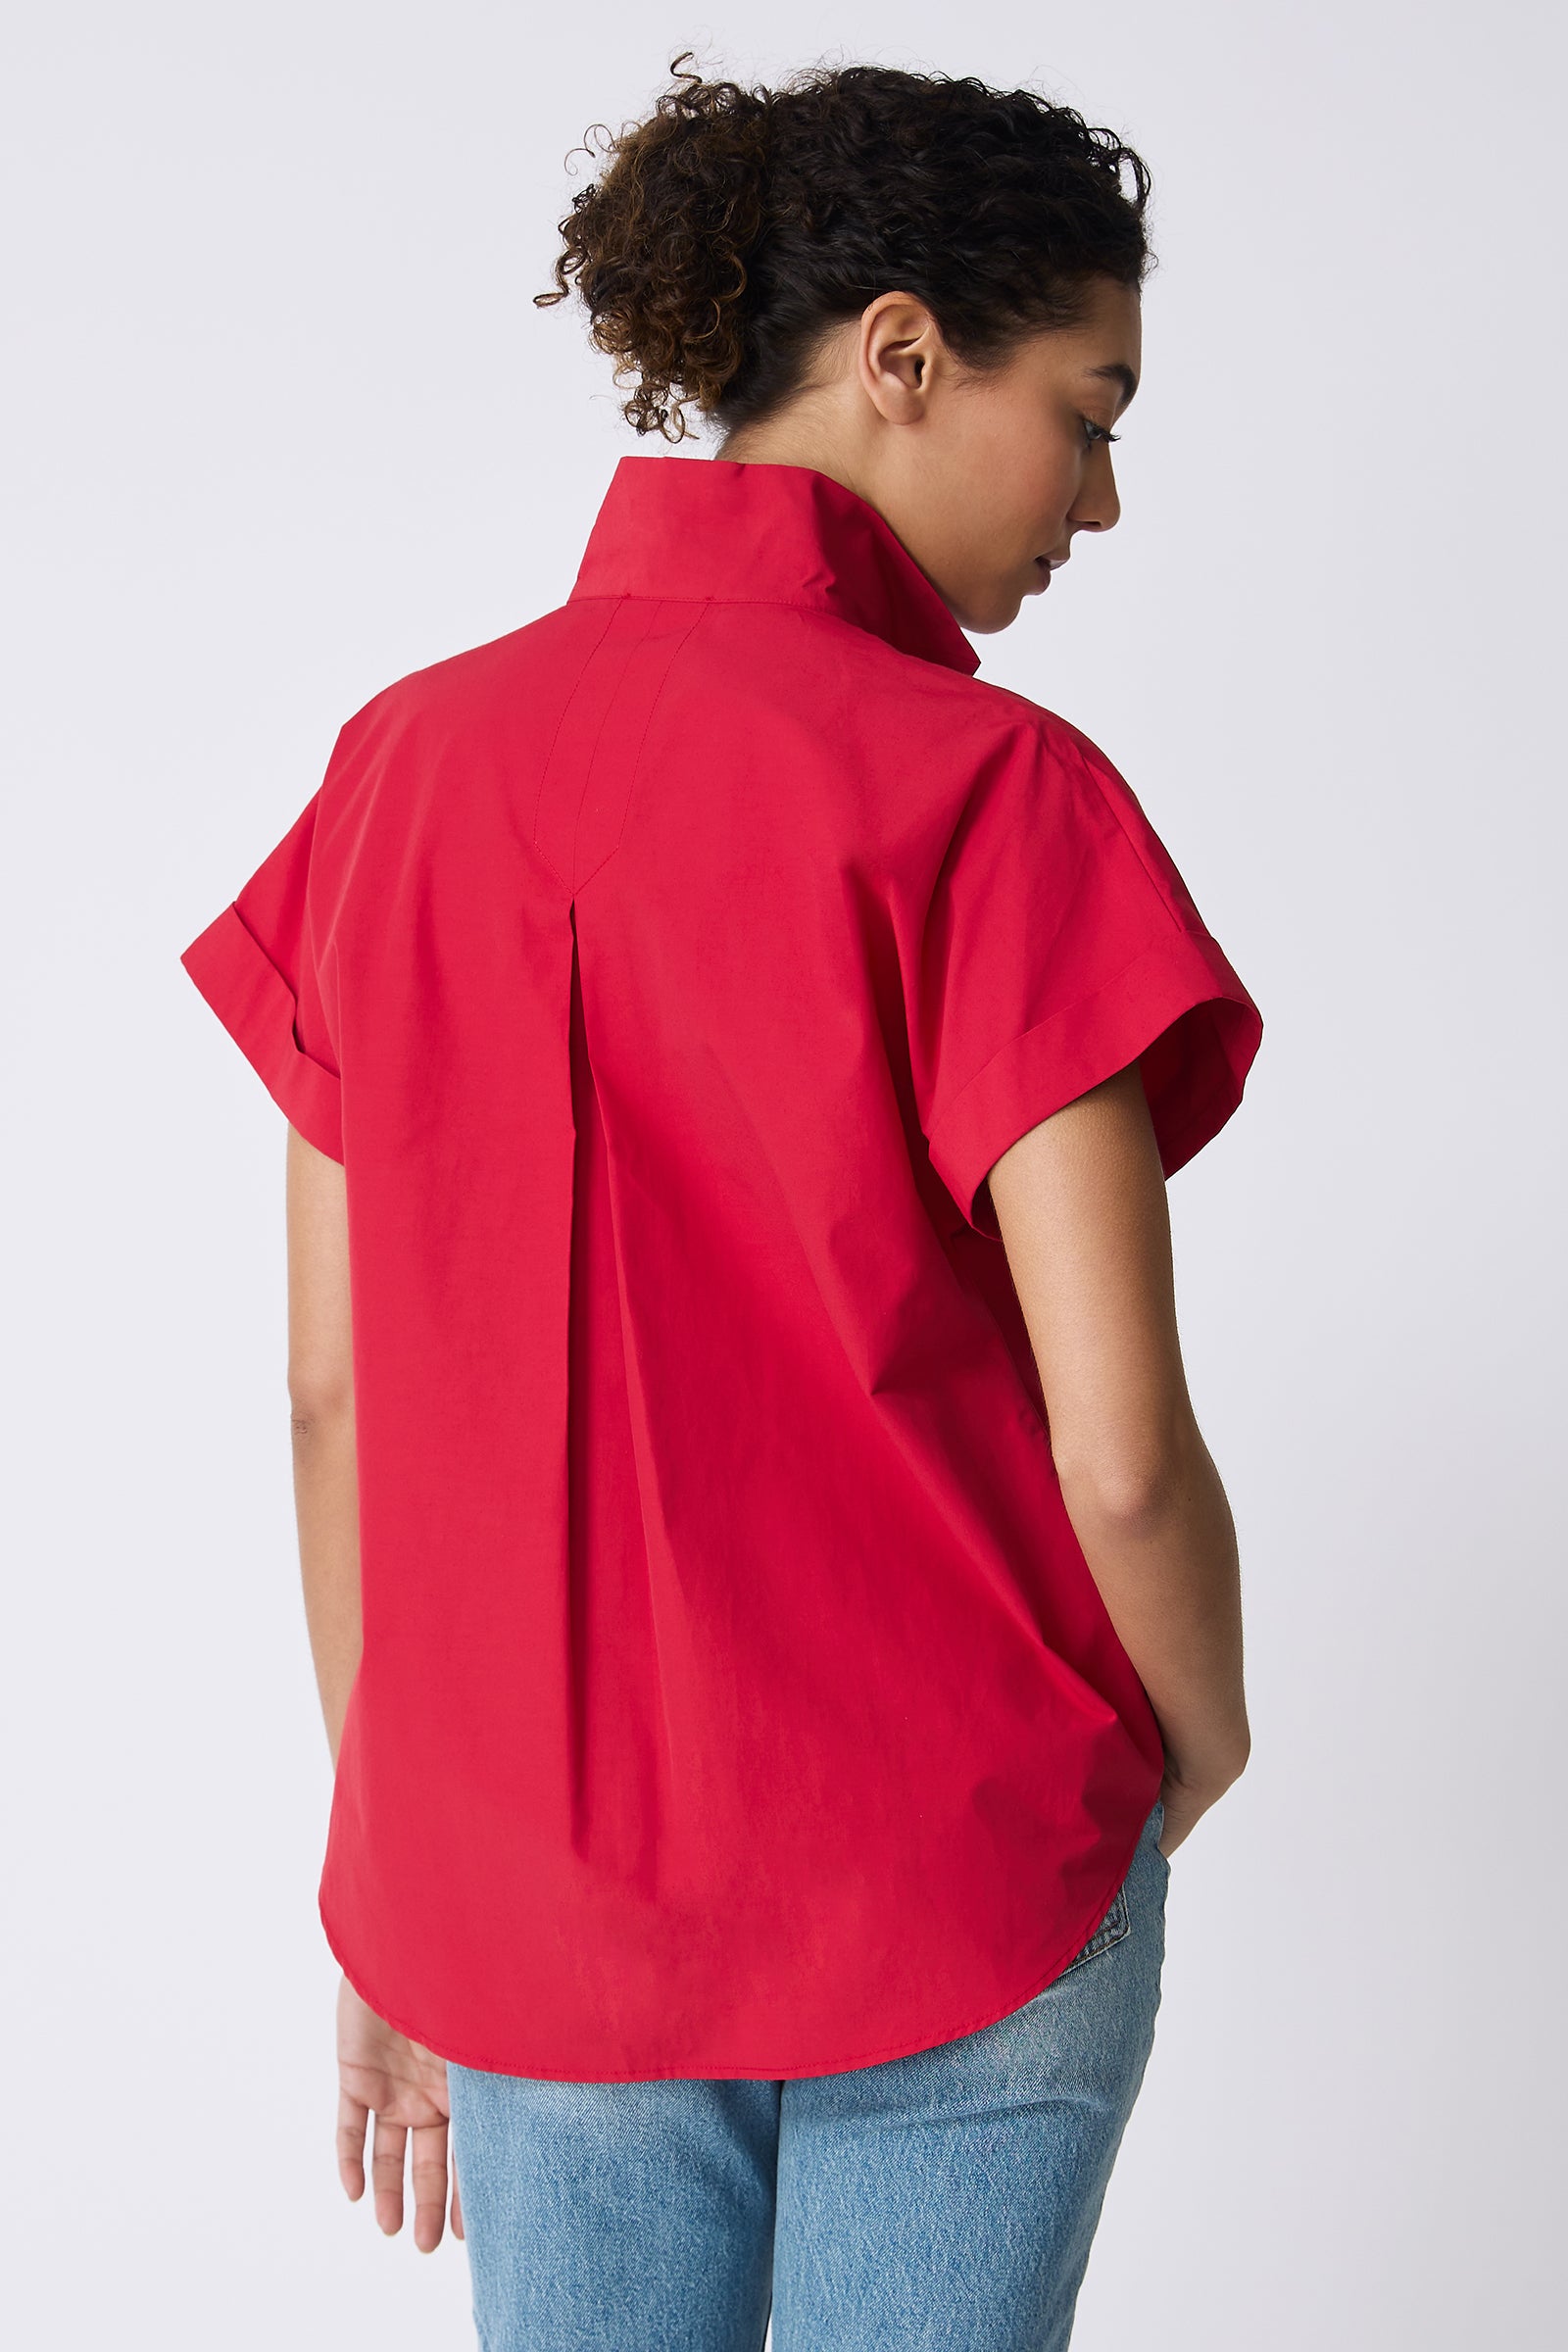 Kal Rieman Ali Kimono Top in Red on model touching collar front view